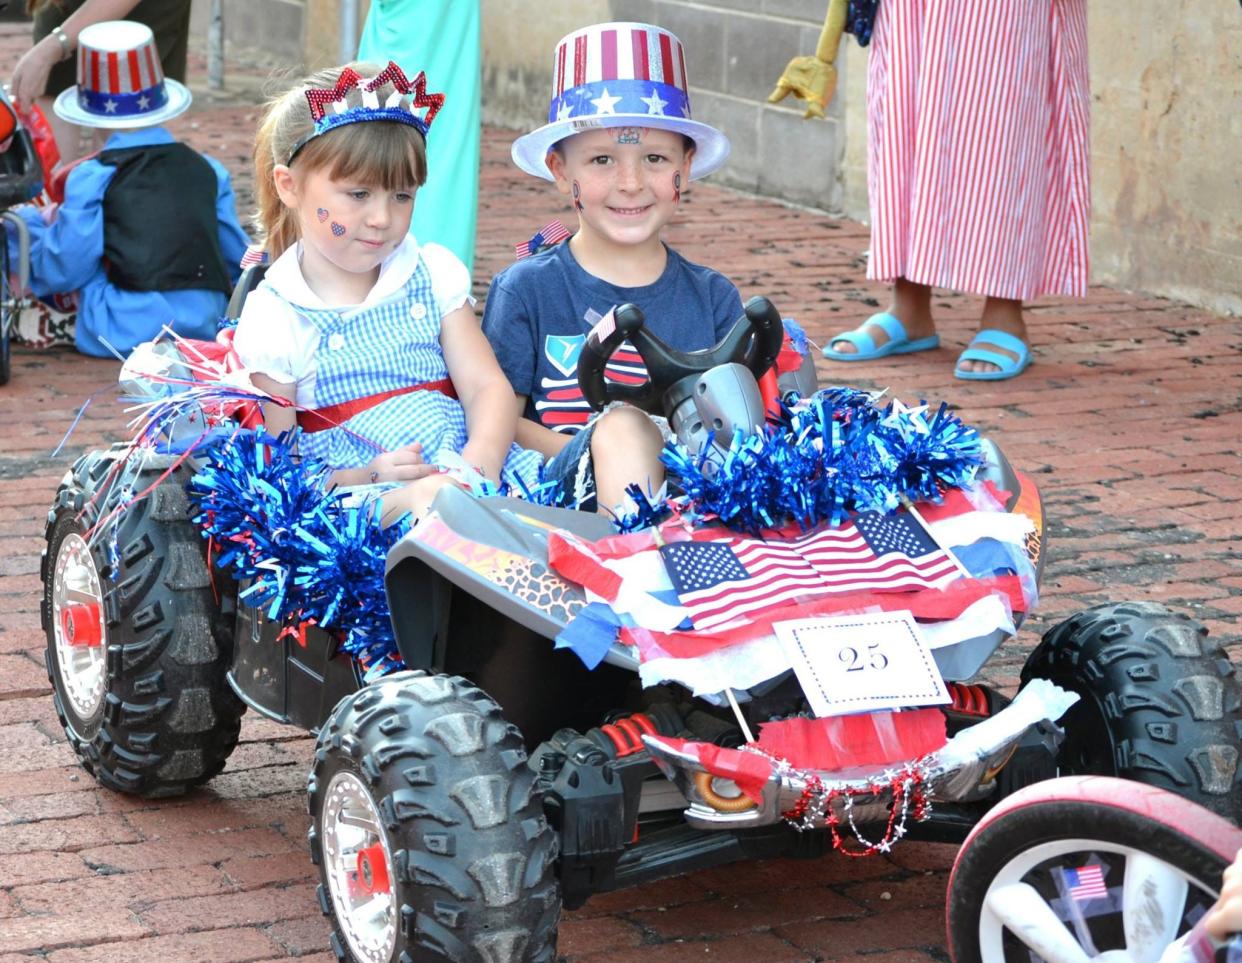 Downtown Wichita Falls will feature a number of events celebrating the 4th of July including a downtown parade, party at the Kell House Museum, live music and fireworks at the Multi-Purpose Events center.